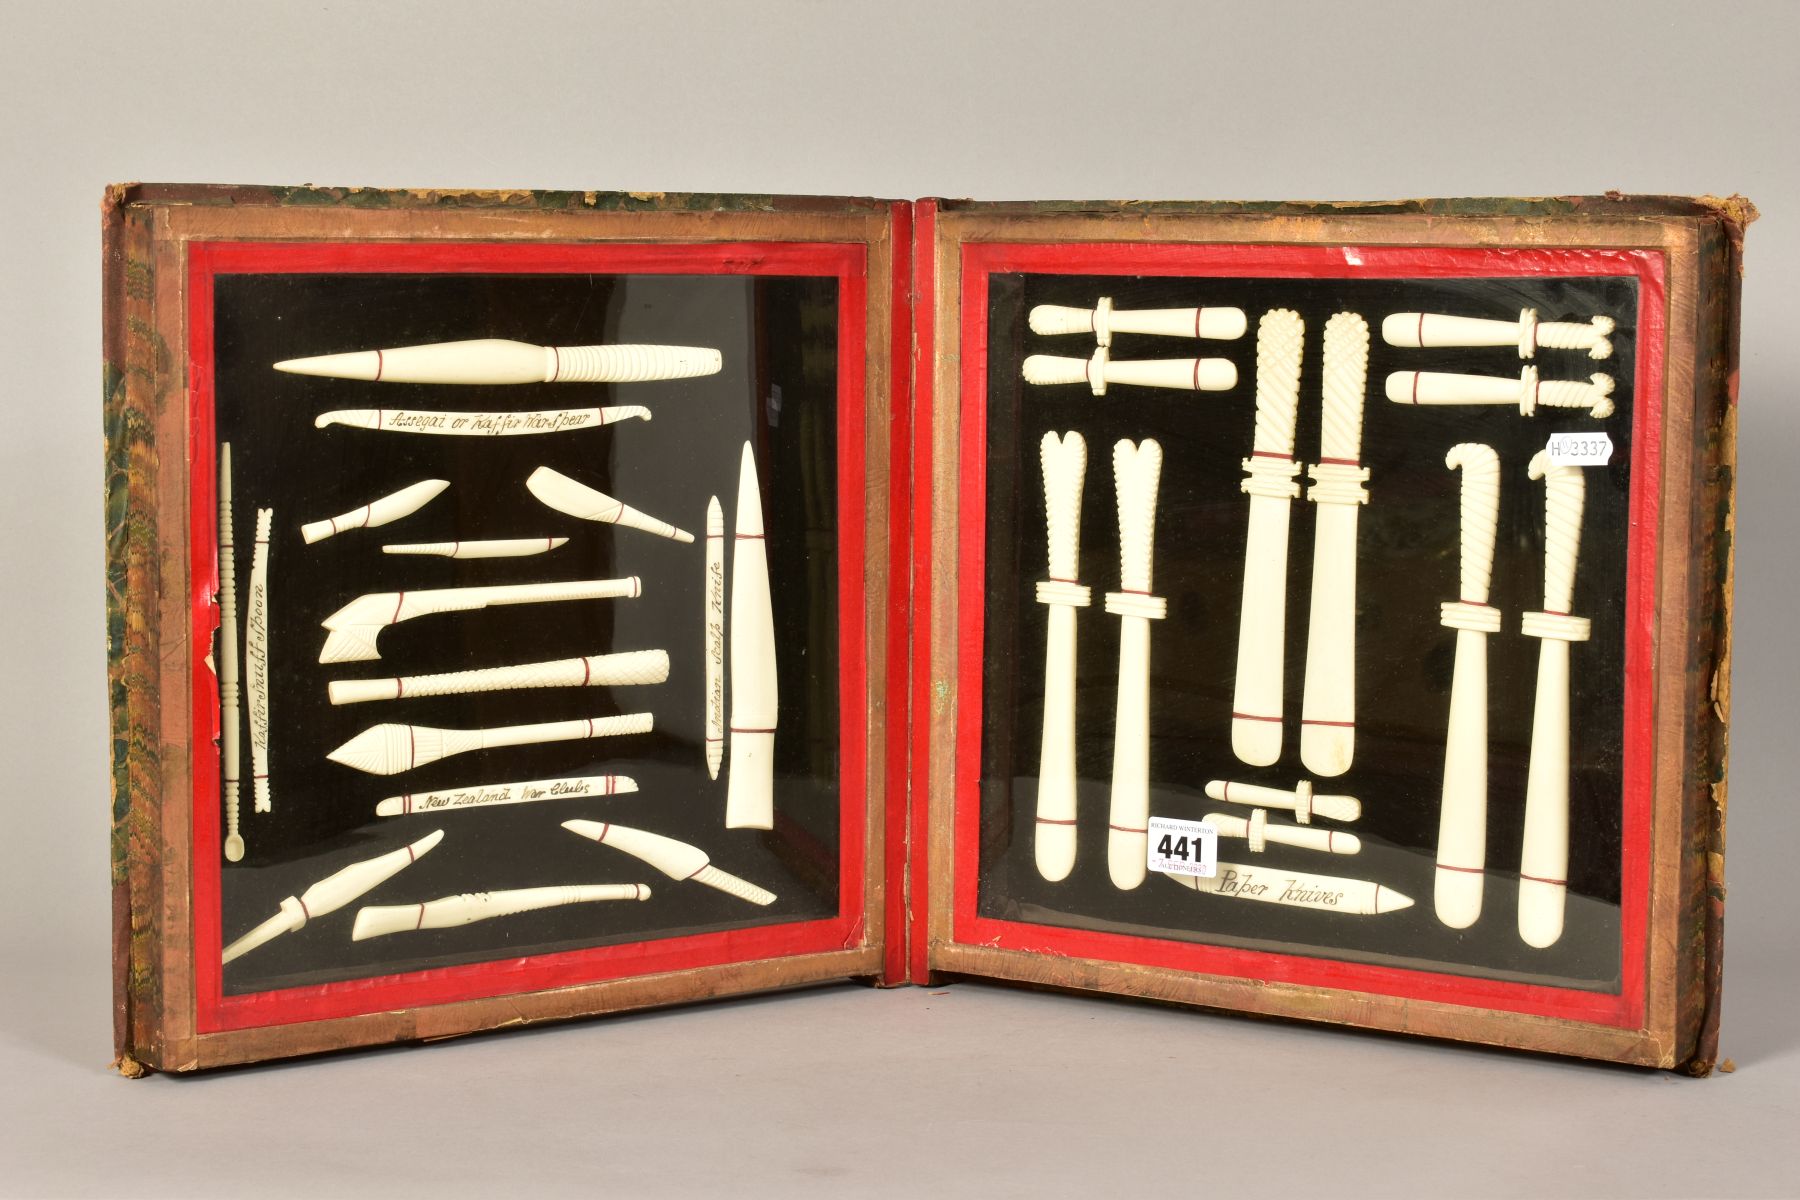 PRISONER OF WAR BONE CARVINGS, a collection of 19th Century carvings housed in a hinged book